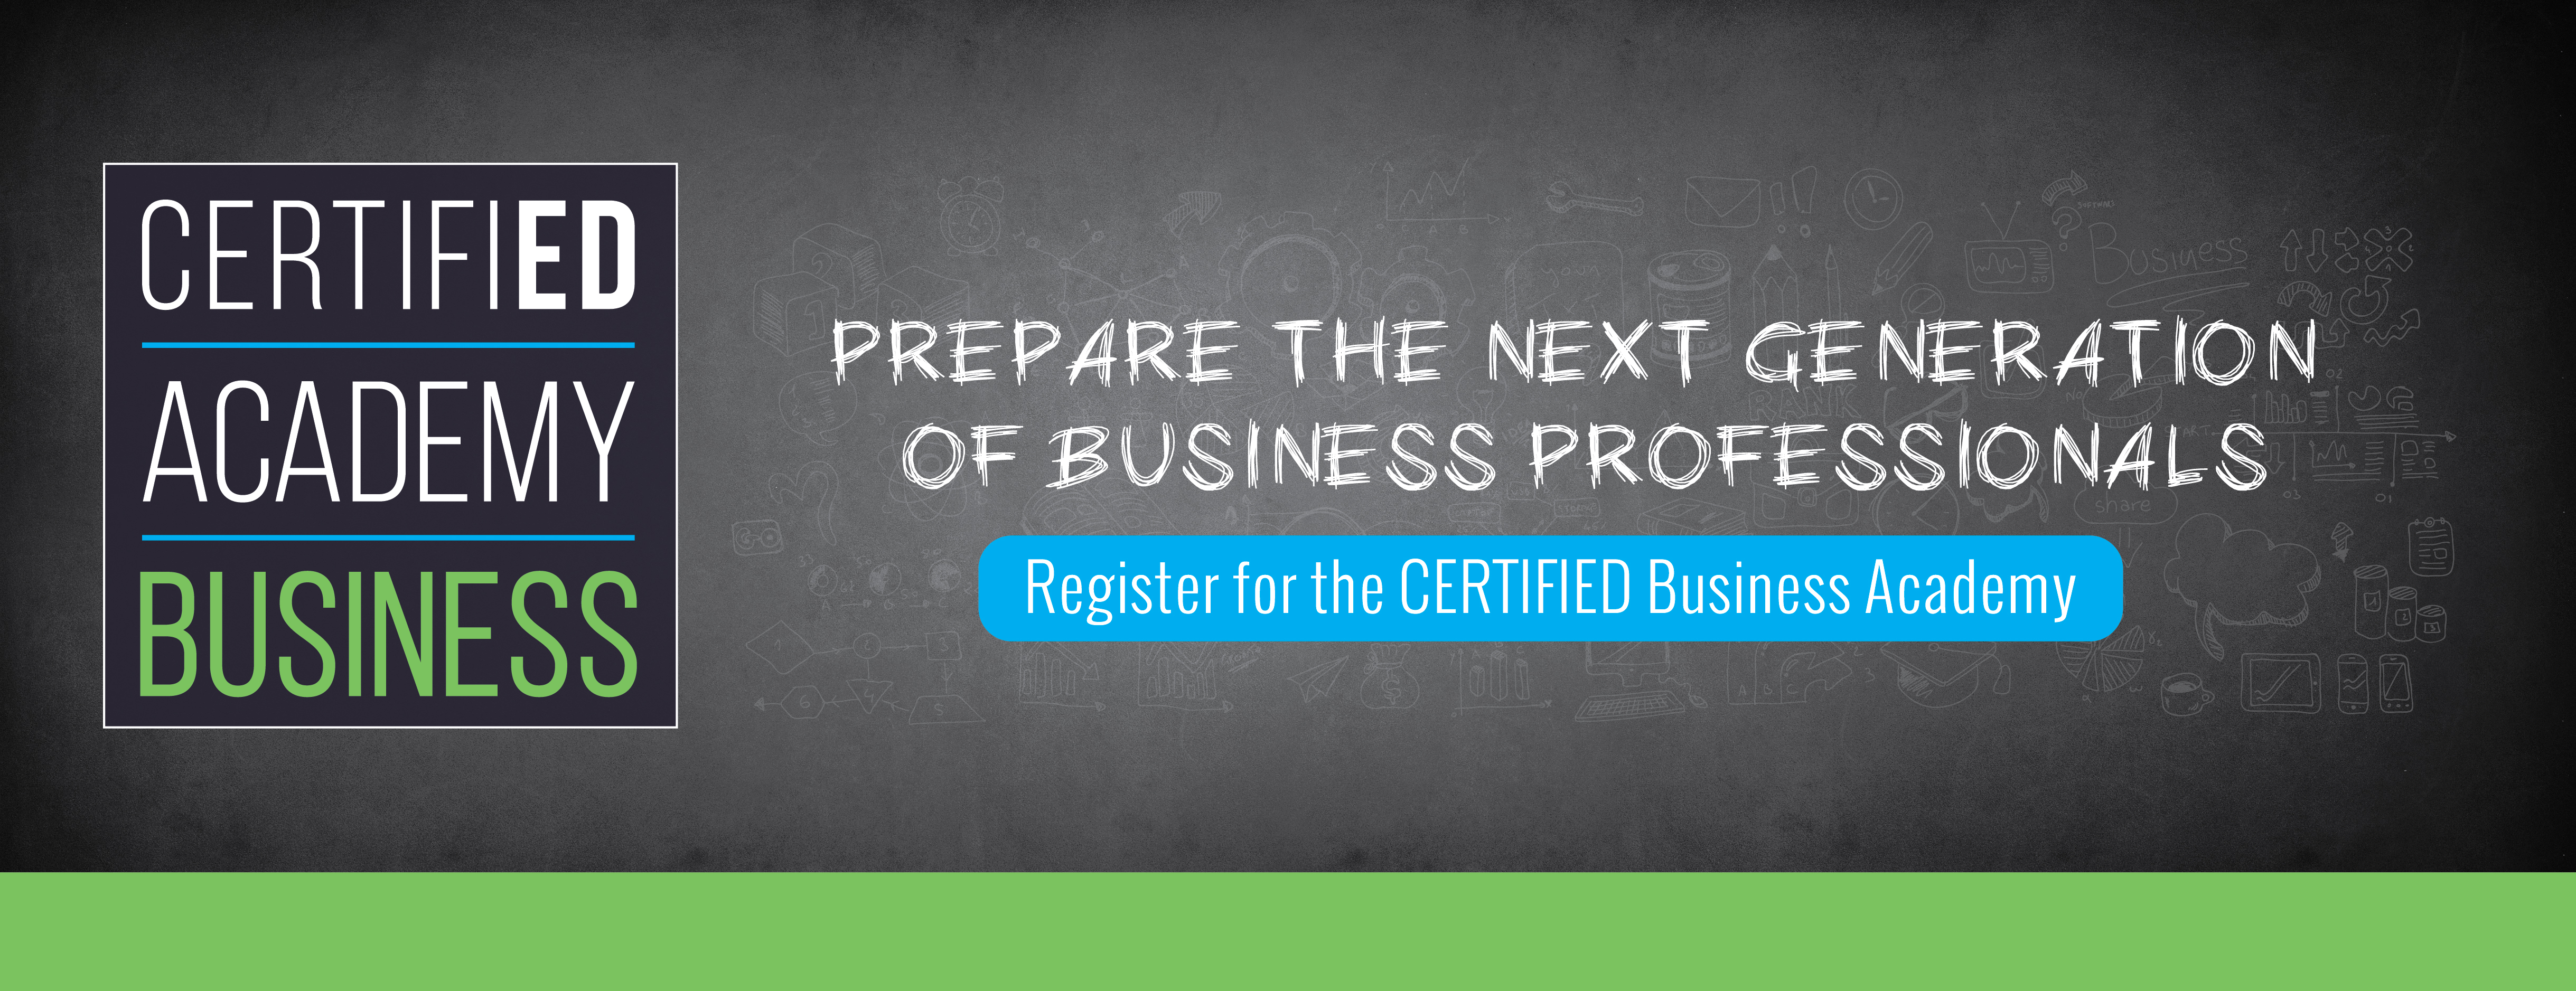 Certified Academy Business: Certified Academy Business<br />
Prepare the next generation of business professionals 